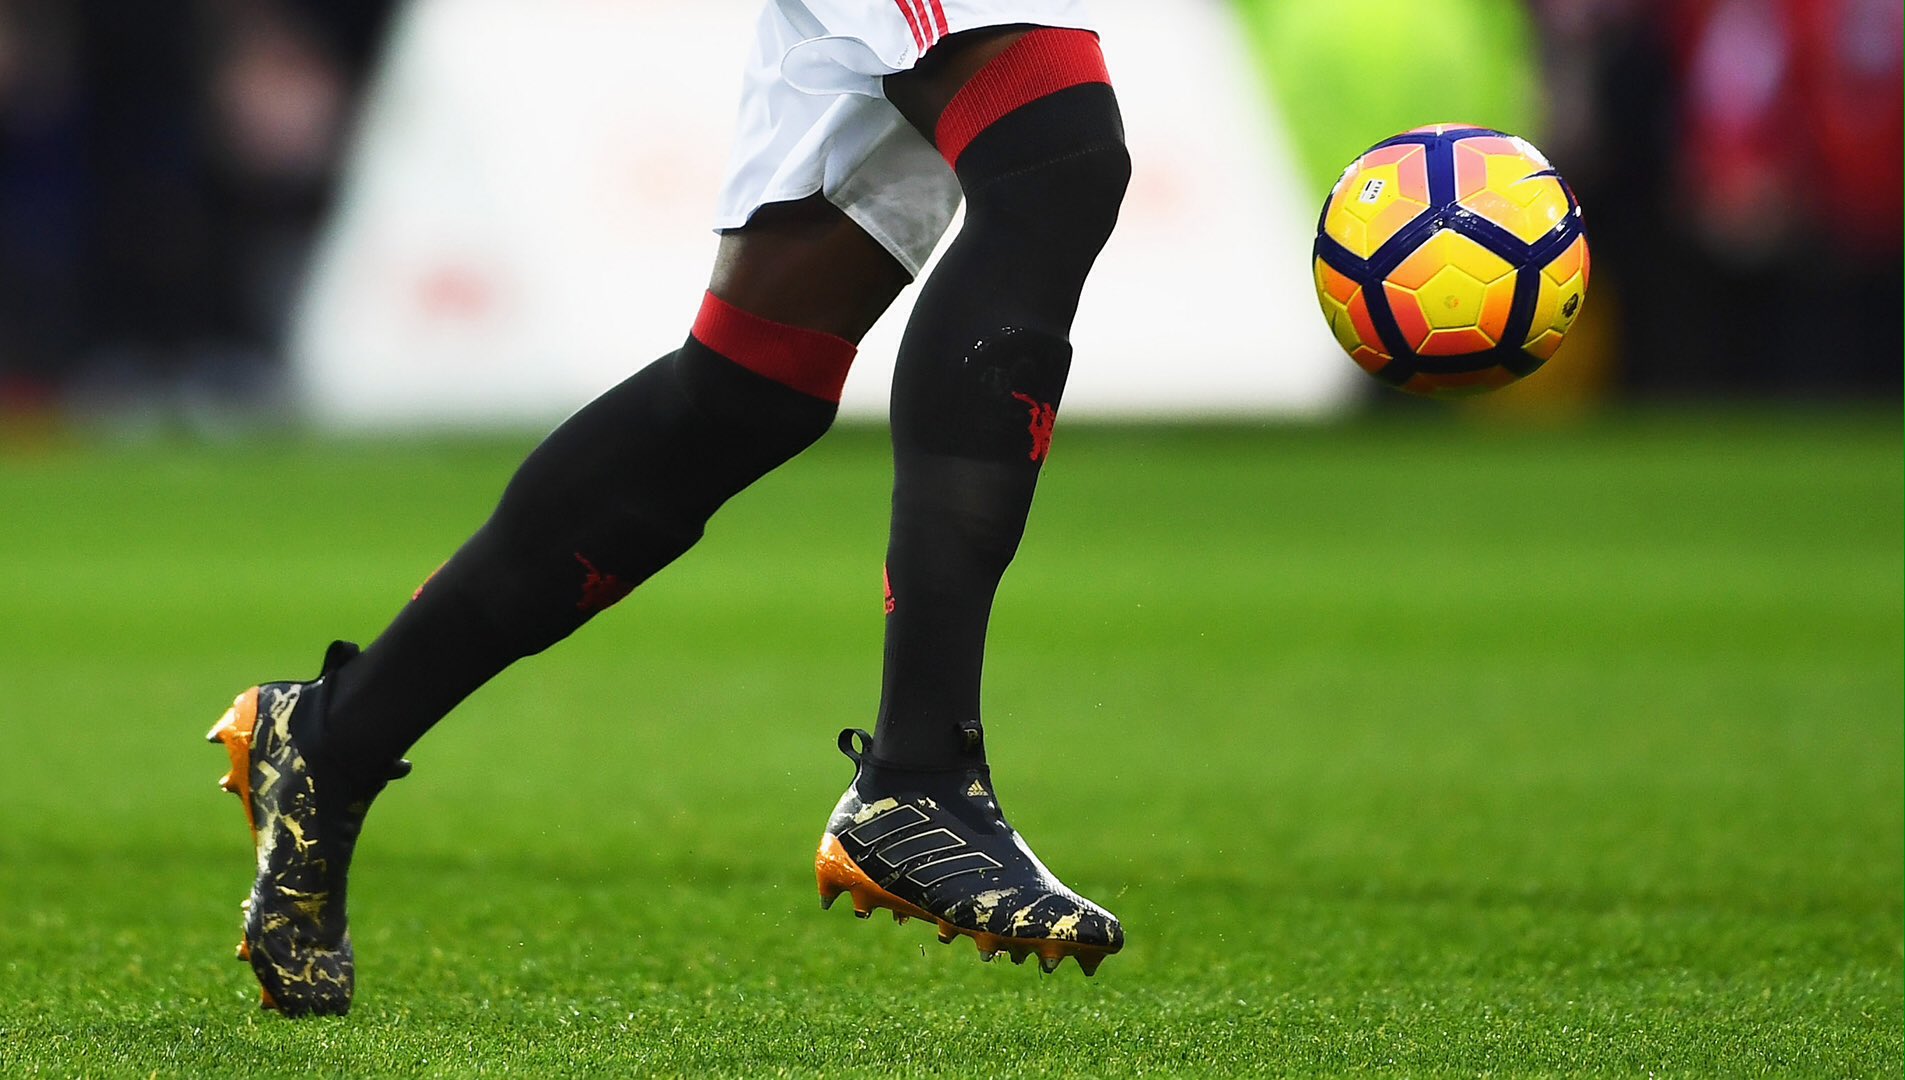 Cristo tráfico Medalla SoccerBible on Twitter: "Paul #Pogba debuts signature adidas ACE 17+  Purecontrol. More here: https://t.co/I3kFm5Kz1M https://t.co/krh1atXxUl" /  Twitter